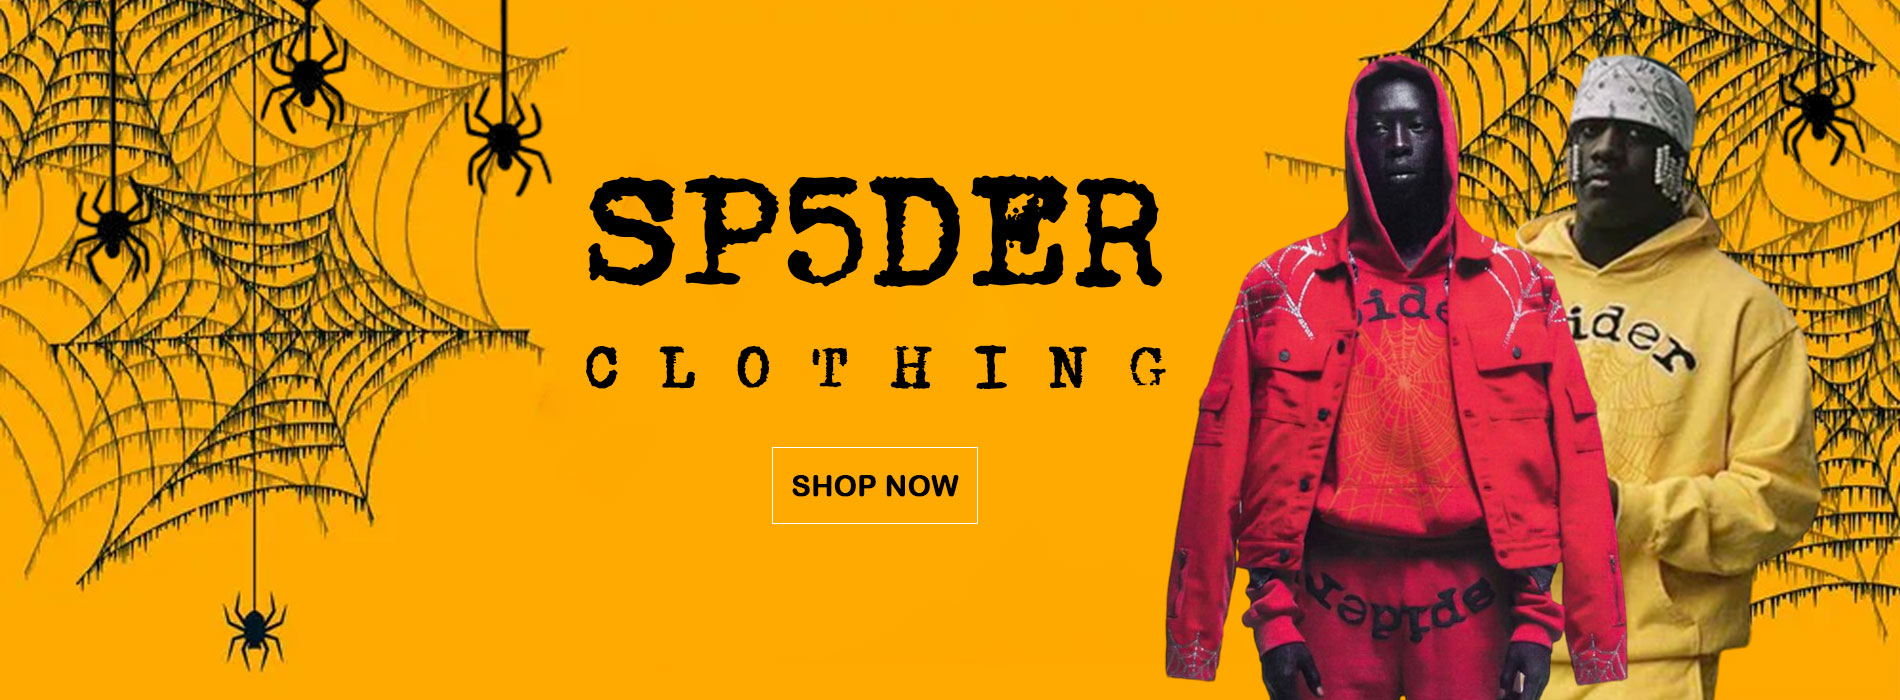 The Ultimate Guide to Sp5der Hoodies Fashion’s Coolest Web